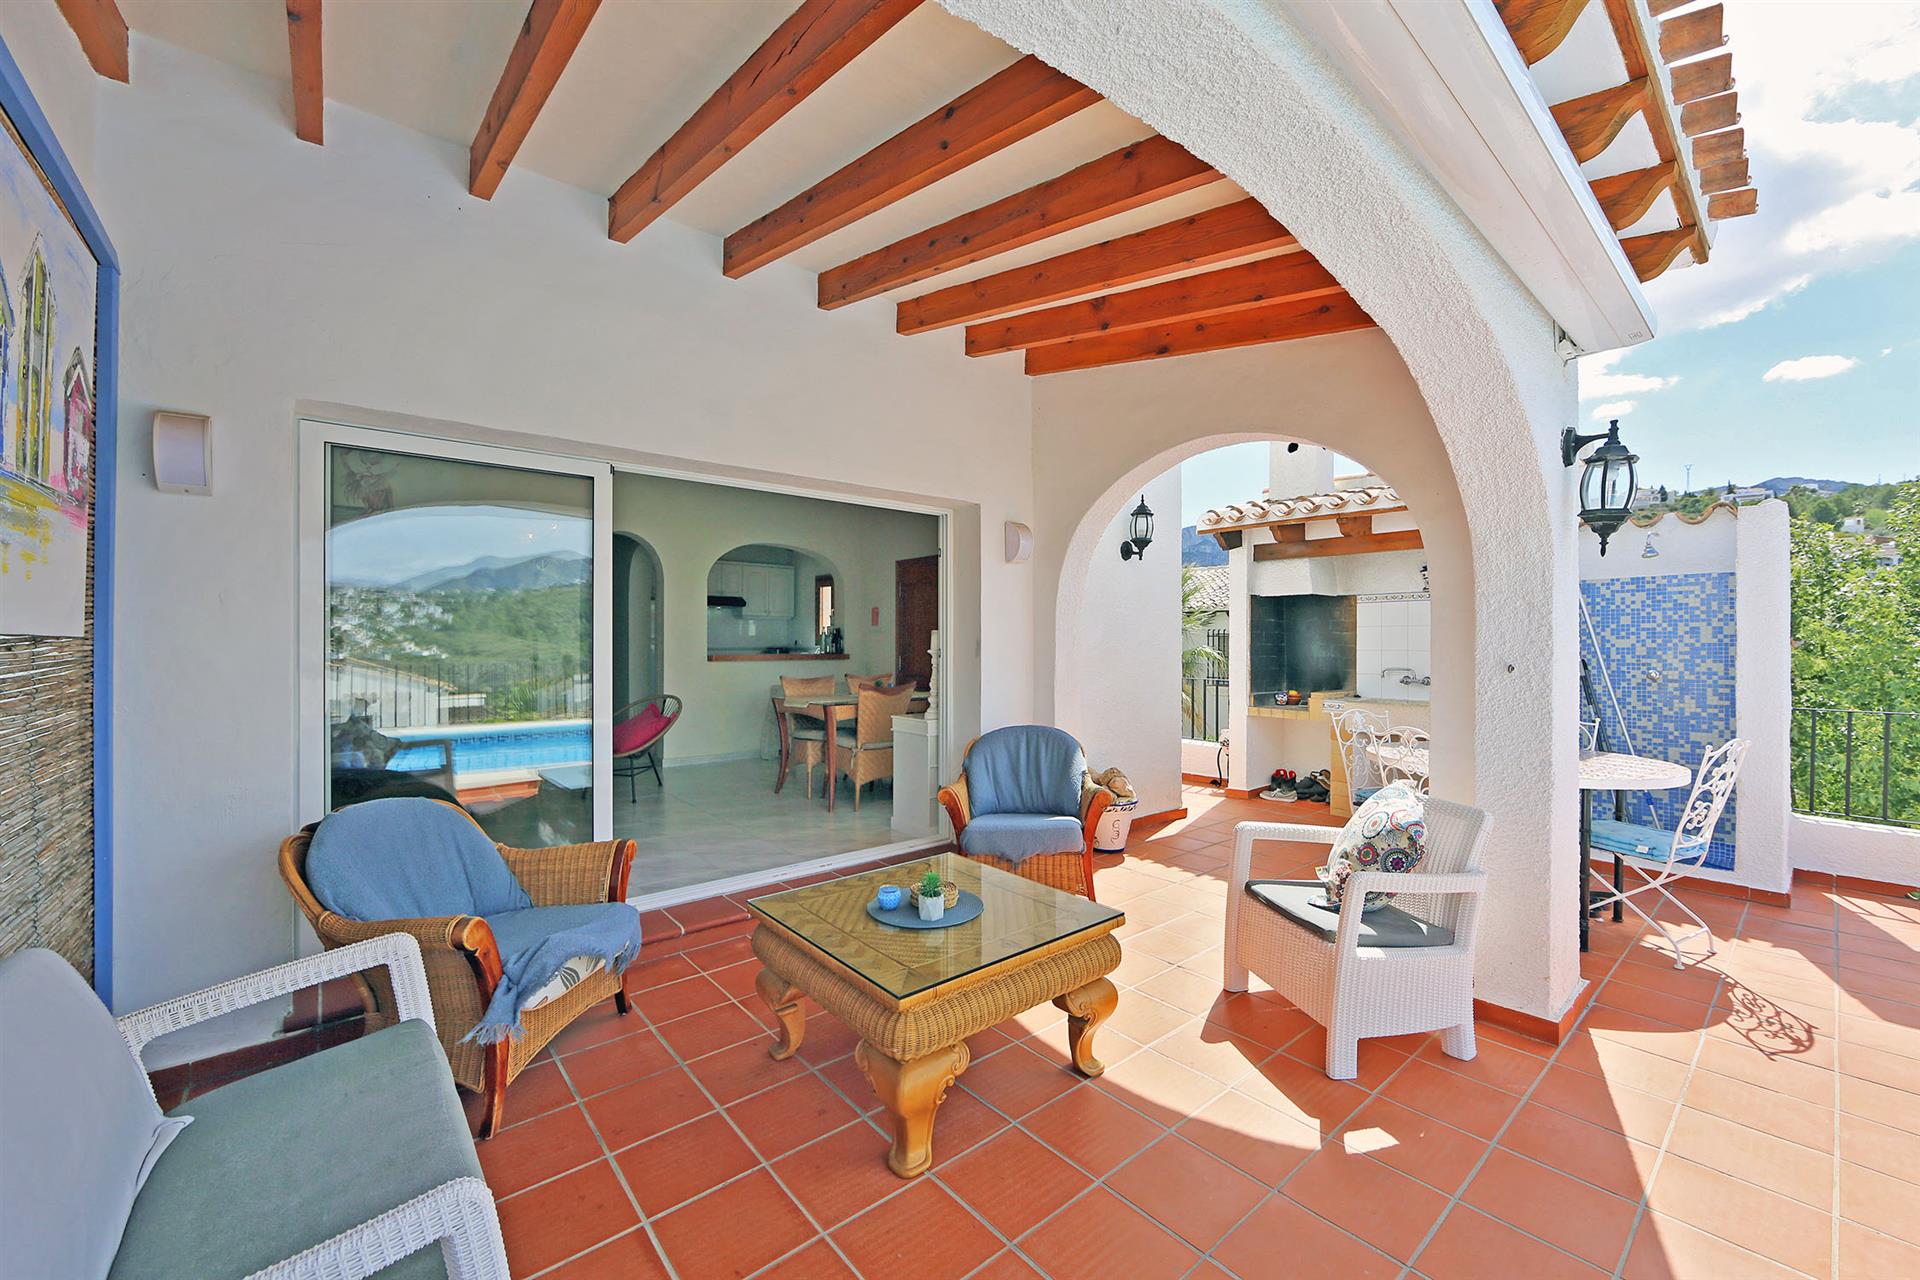 3 bedroom villa with panoramic view